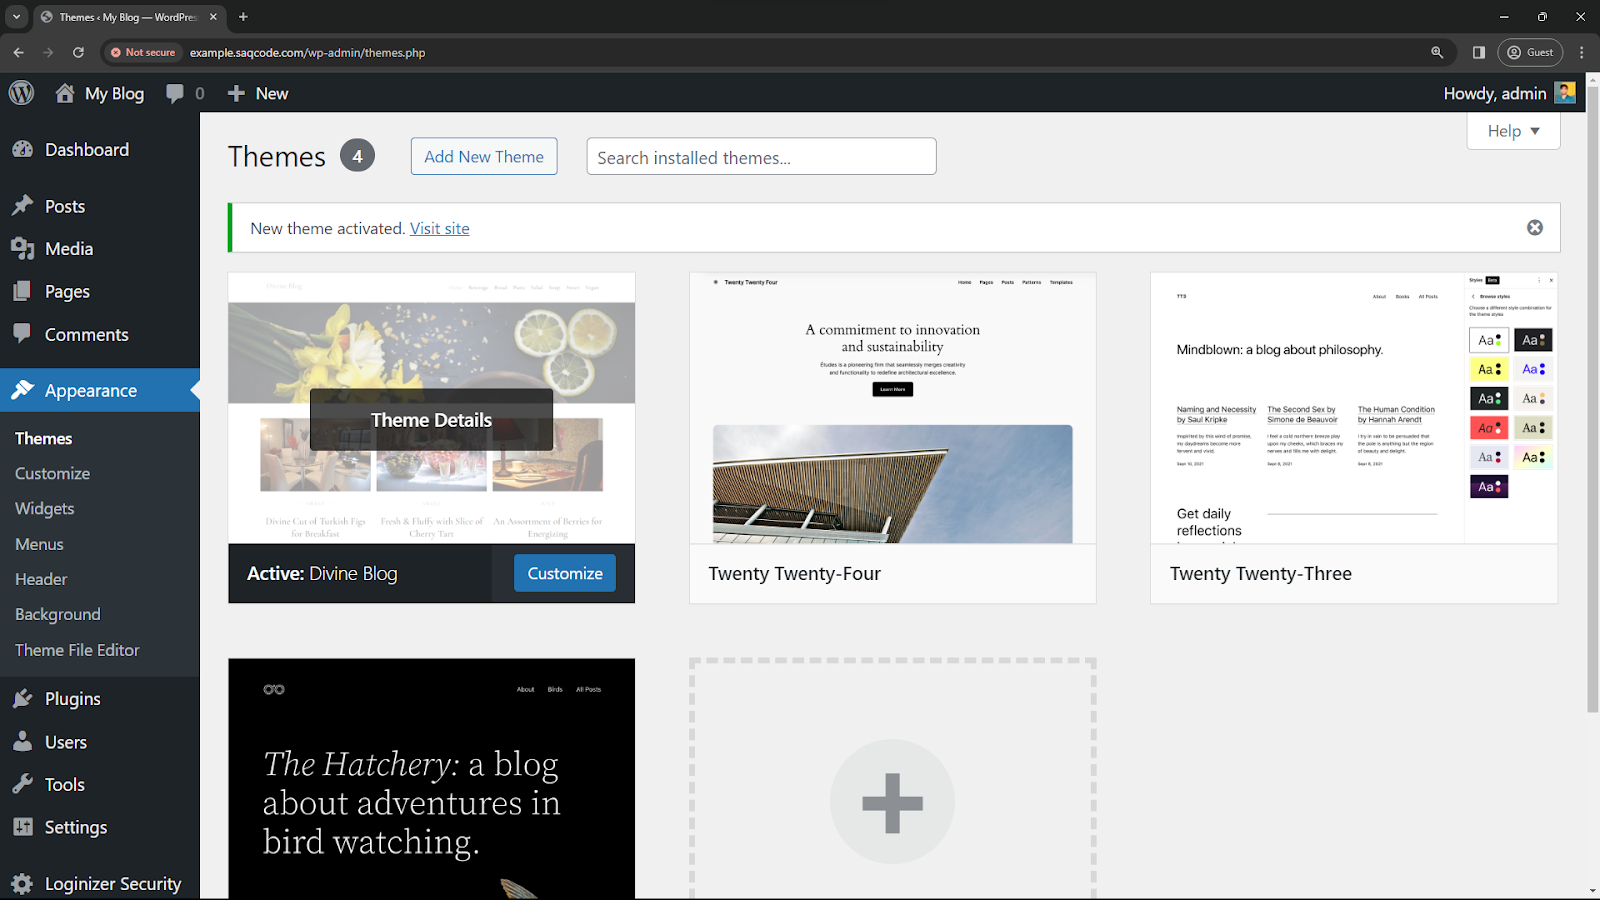  how to install a theme on wordpress blog website